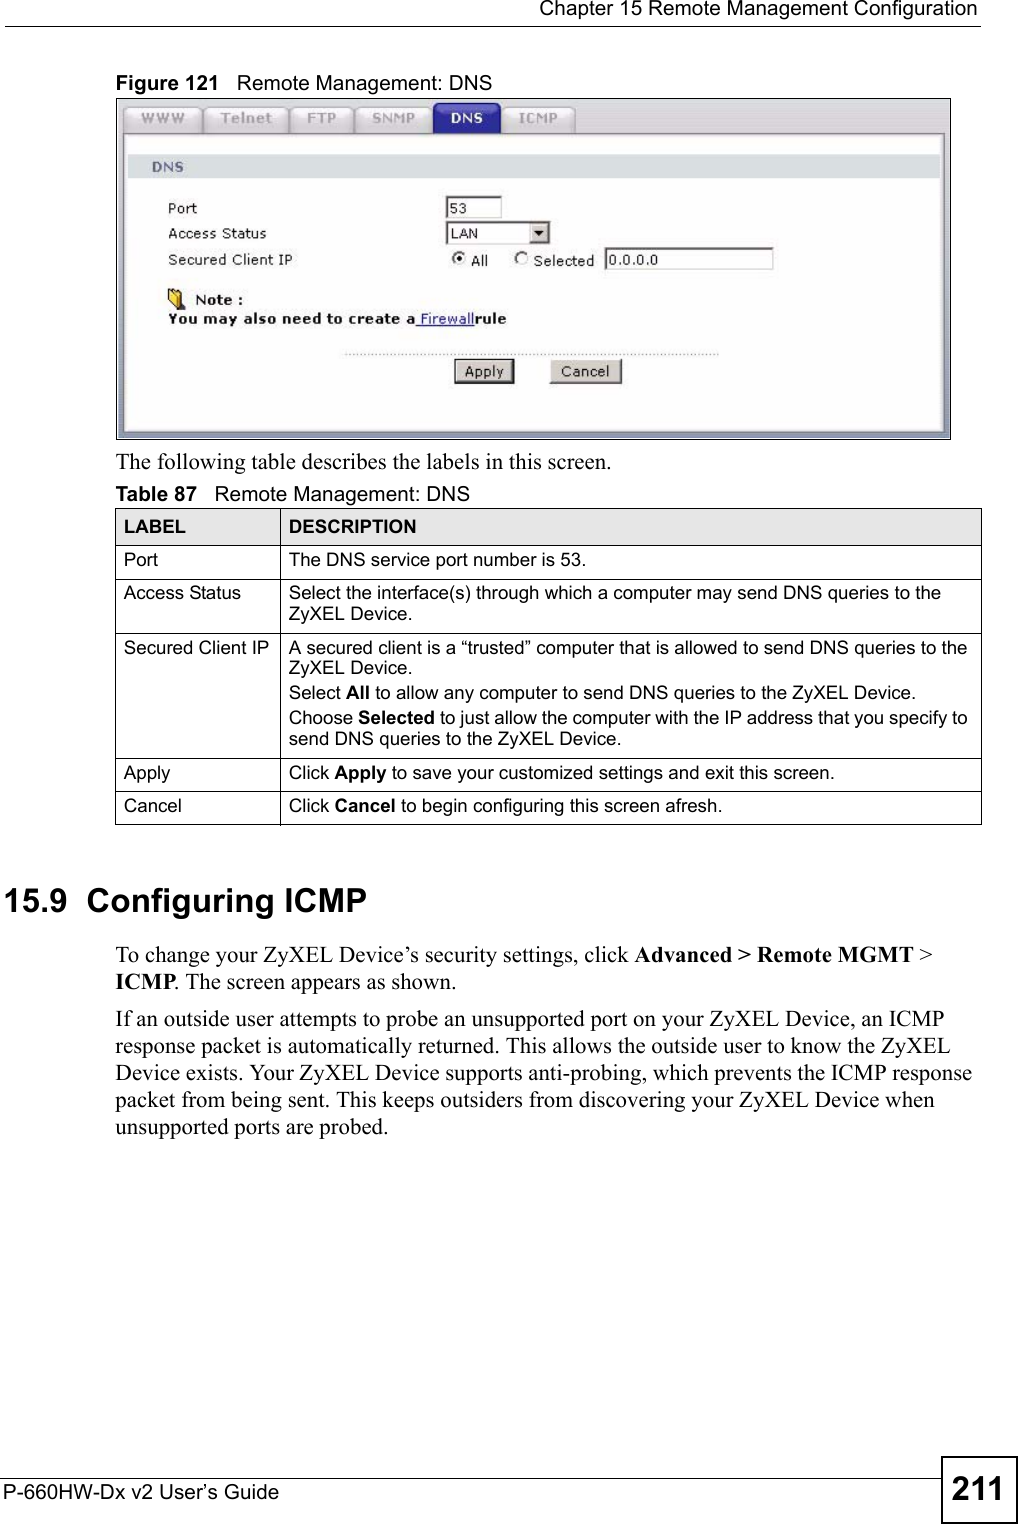  Chapter 15 Remote Management ConfigurationP-660HW-Dx v2 User’s Guide 211Figure 121   Remote Management: DNSThe following table describes the labels in this screen.15.9  Configuring ICMP To change your ZyXEL Device’s security settings, click Advanced &gt; Remote MGMT &gt; ICMP. The screen appears as shown.If an outside user attempts to probe an unsupported port on your ZyXEL Device, an ICMP response packet is automatically returned. This allows the outside user to know the ZyXEL Device exists. Your ZyXEL Device supports anti-probing, which prevents the ICMP response packet from being sent. This keeps outsiders from discovering your ZyXEL Device when unsupported ports are probed. Table 87   Remote Management: DNSLABEL DESCRIPTIONPort The DNS service port number is 53.Access Status Select the interface(s) through which a computer may send DNS queries to the ZyXEL Device.Secured Client IP A secured client is a “trusted” computer that is allowed to send DNS queries to the ZyXEL Device.Select All to allow any computer to send DNS queries to the ZyXEL Device.Choose Selected to just allow the computer with the IP address that you specify to send DNS queries to the ZyXEL Device.Apply Click Apply to save your customized settings and exit this screen. Cancel Click Cancel to begin configuring this screen afresh.